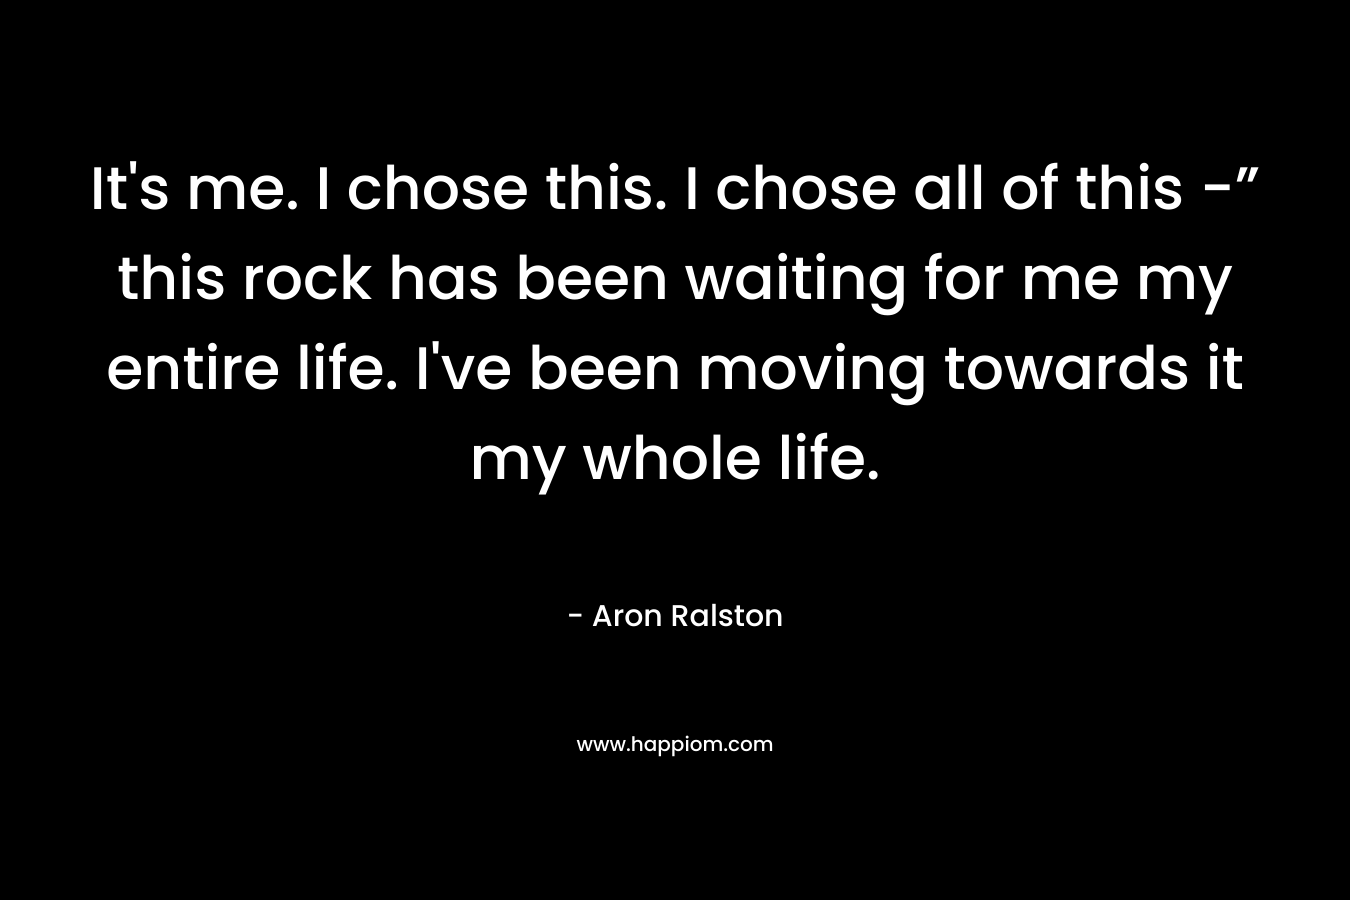 It’s me. I chose this. I chose all of this -” this rock has been waiting for me my entire life. I’ve been moving towards it my whole life. – Aron Ralston